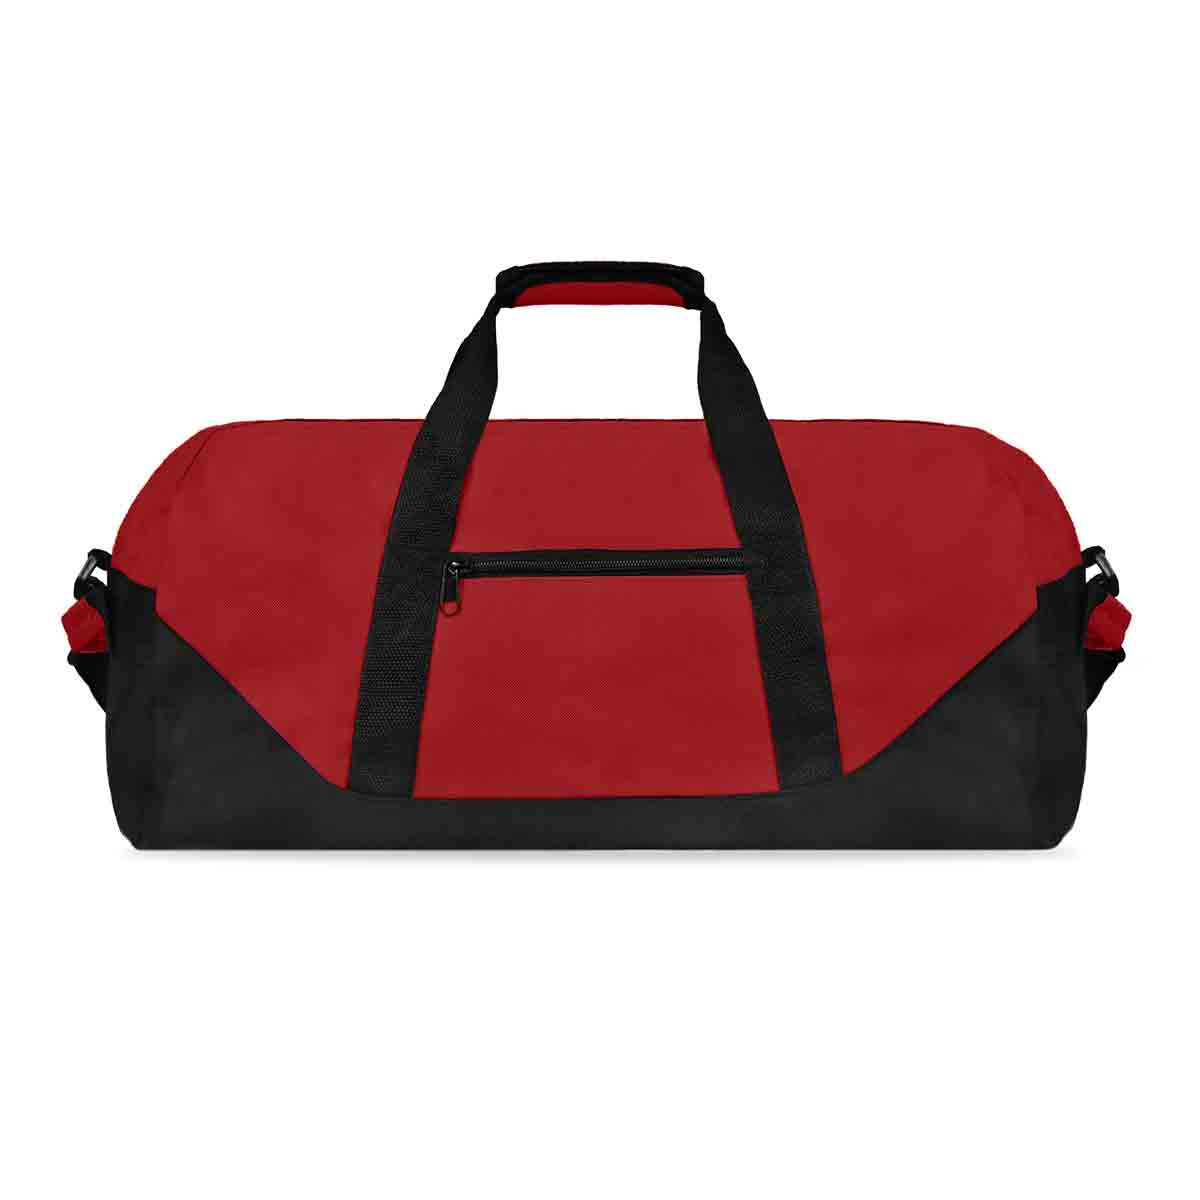 Dalix 21" Large Duffel Bag with Adjustable Strap